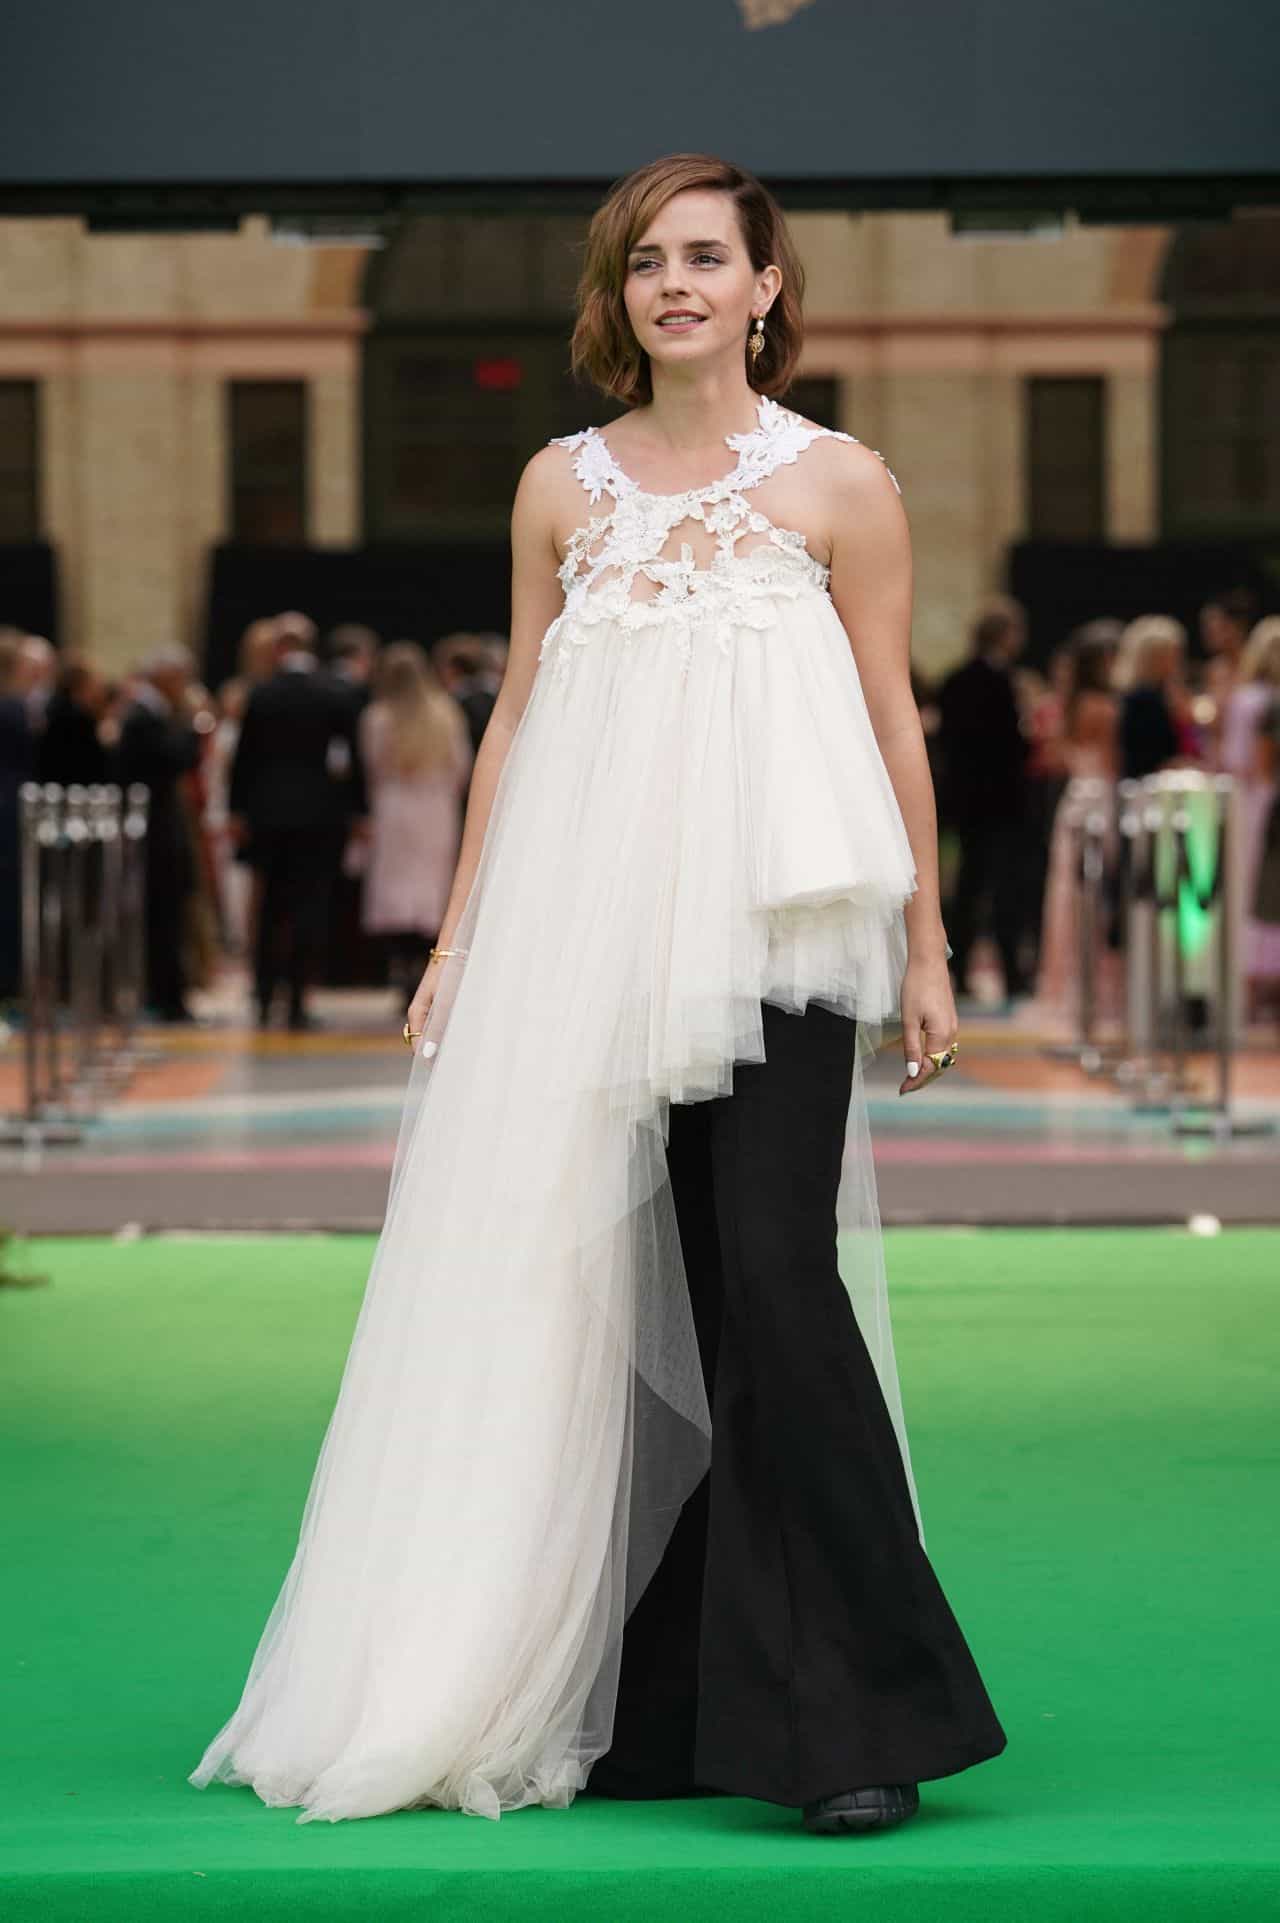 Emma Watson Wore a Stunning Backless Dress at The Earthshot Prize 2021